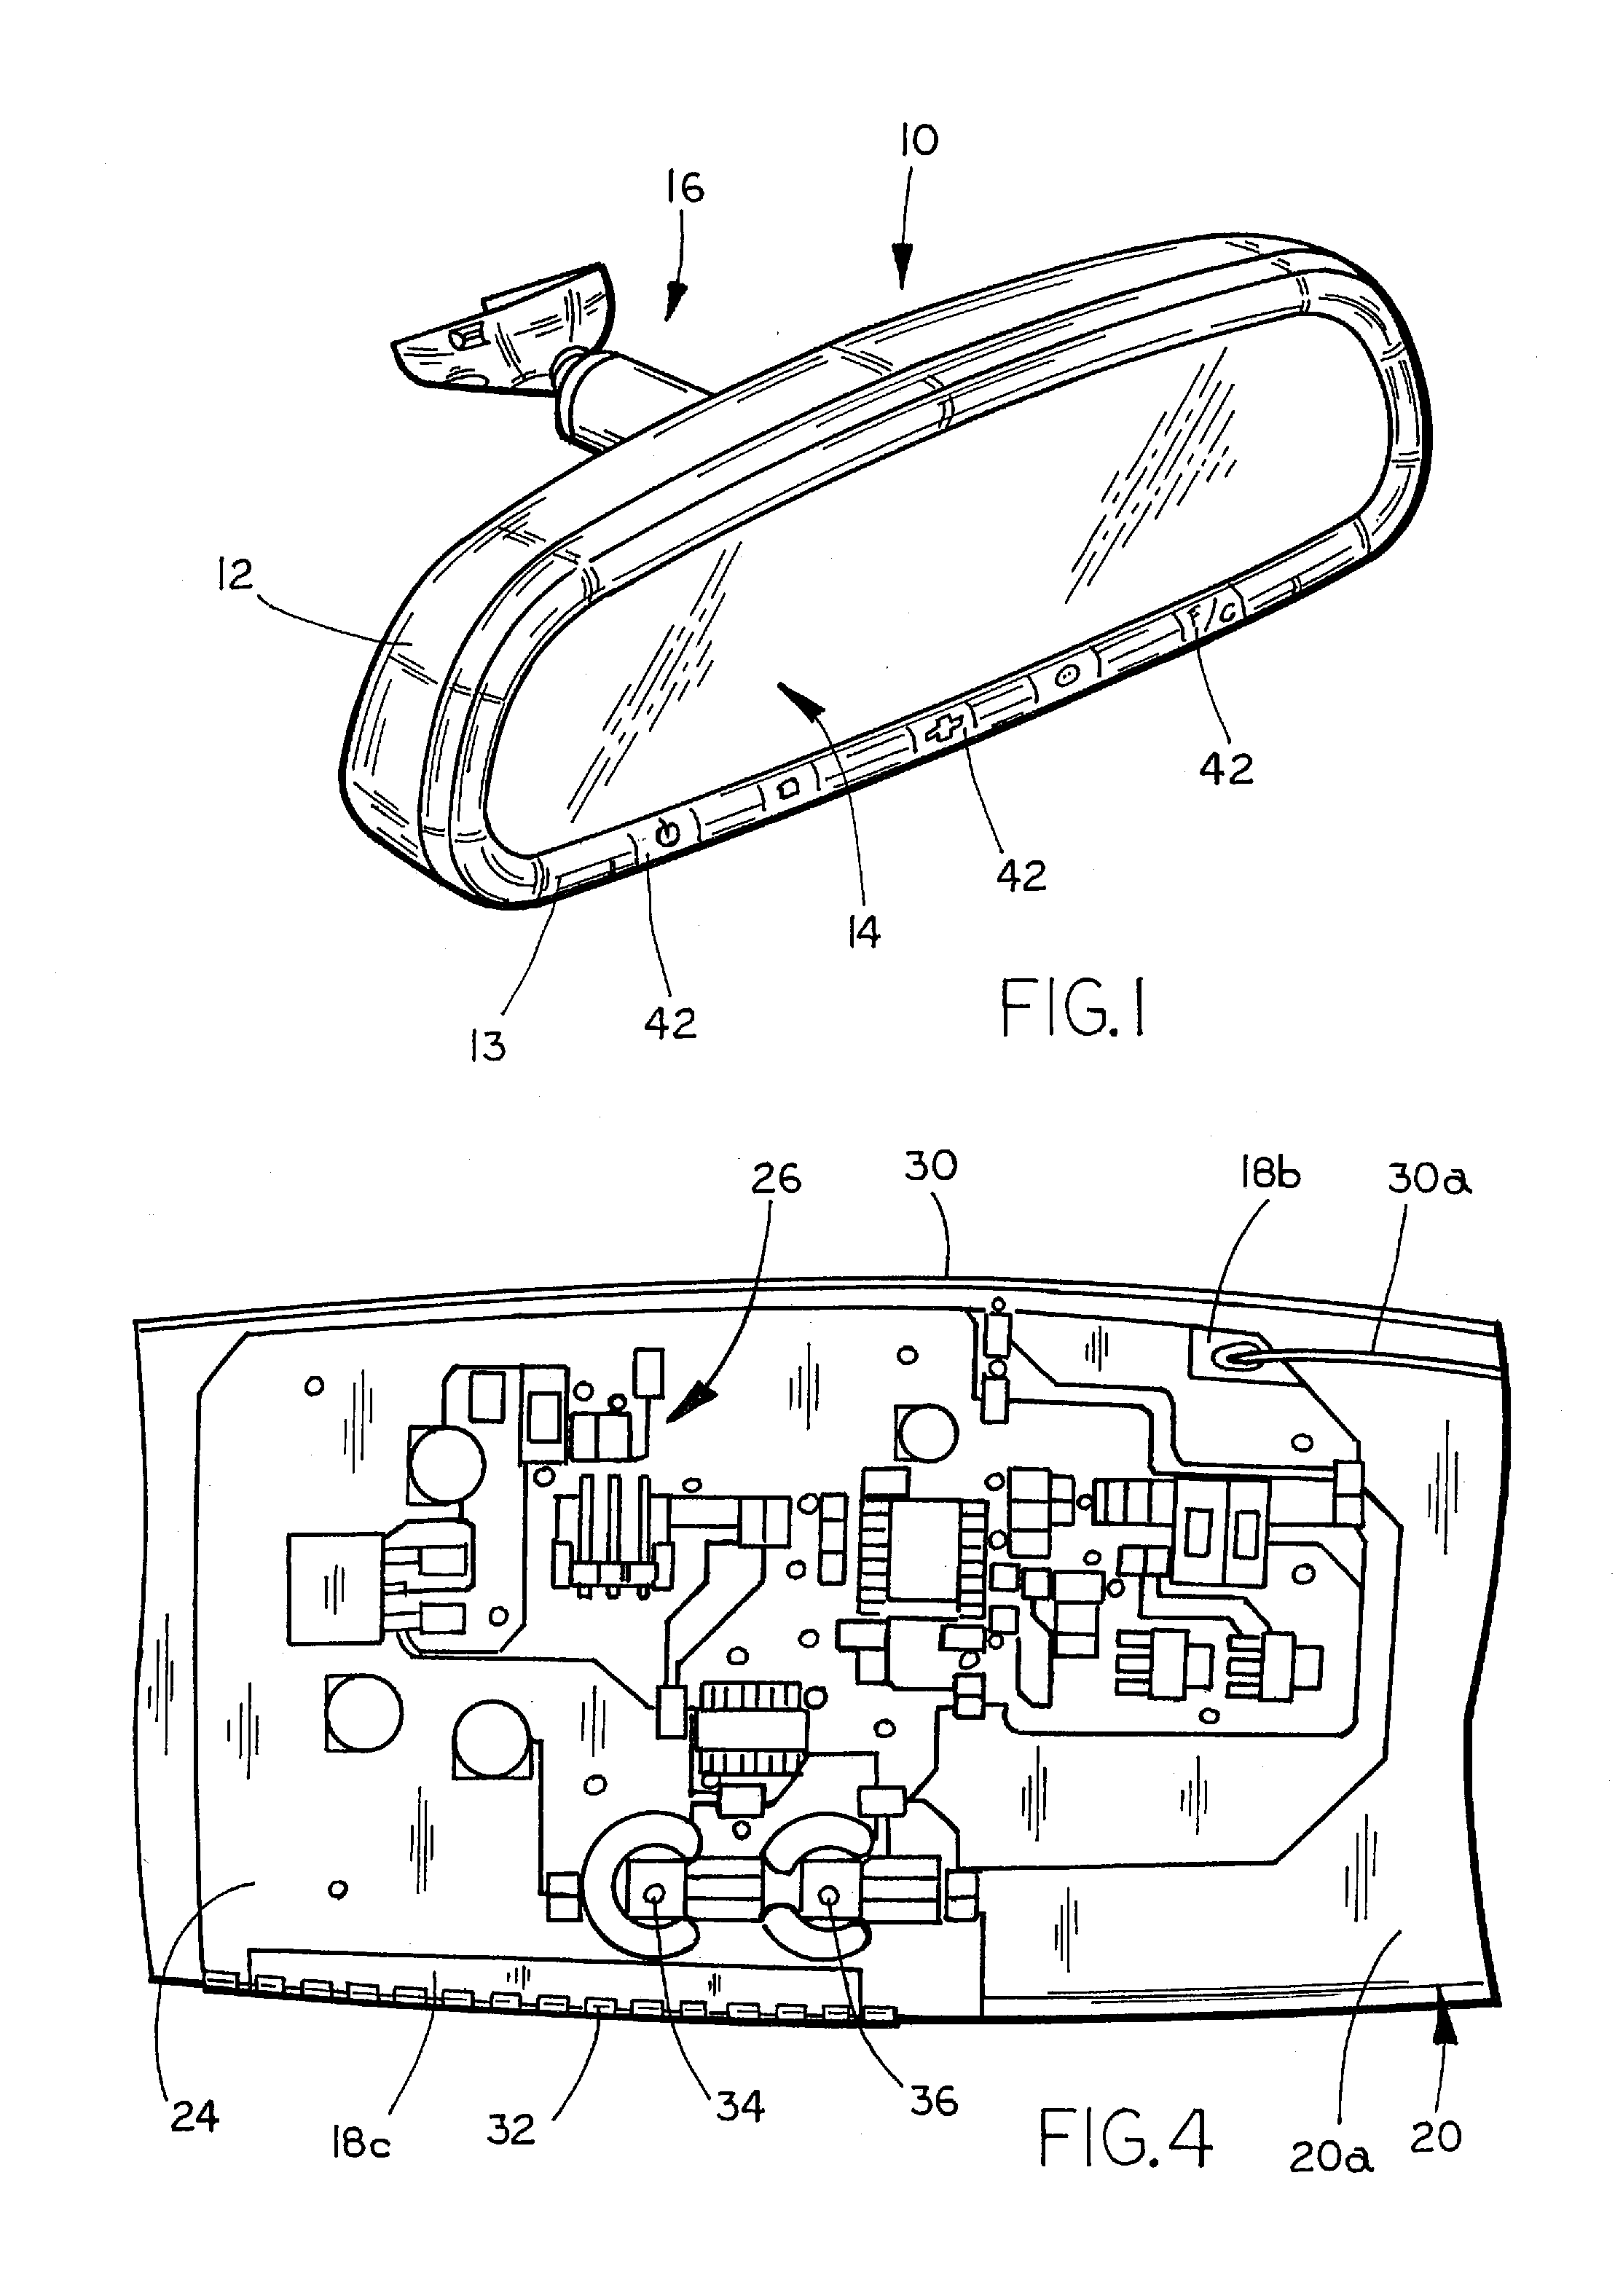 Mirror reflective element assembly